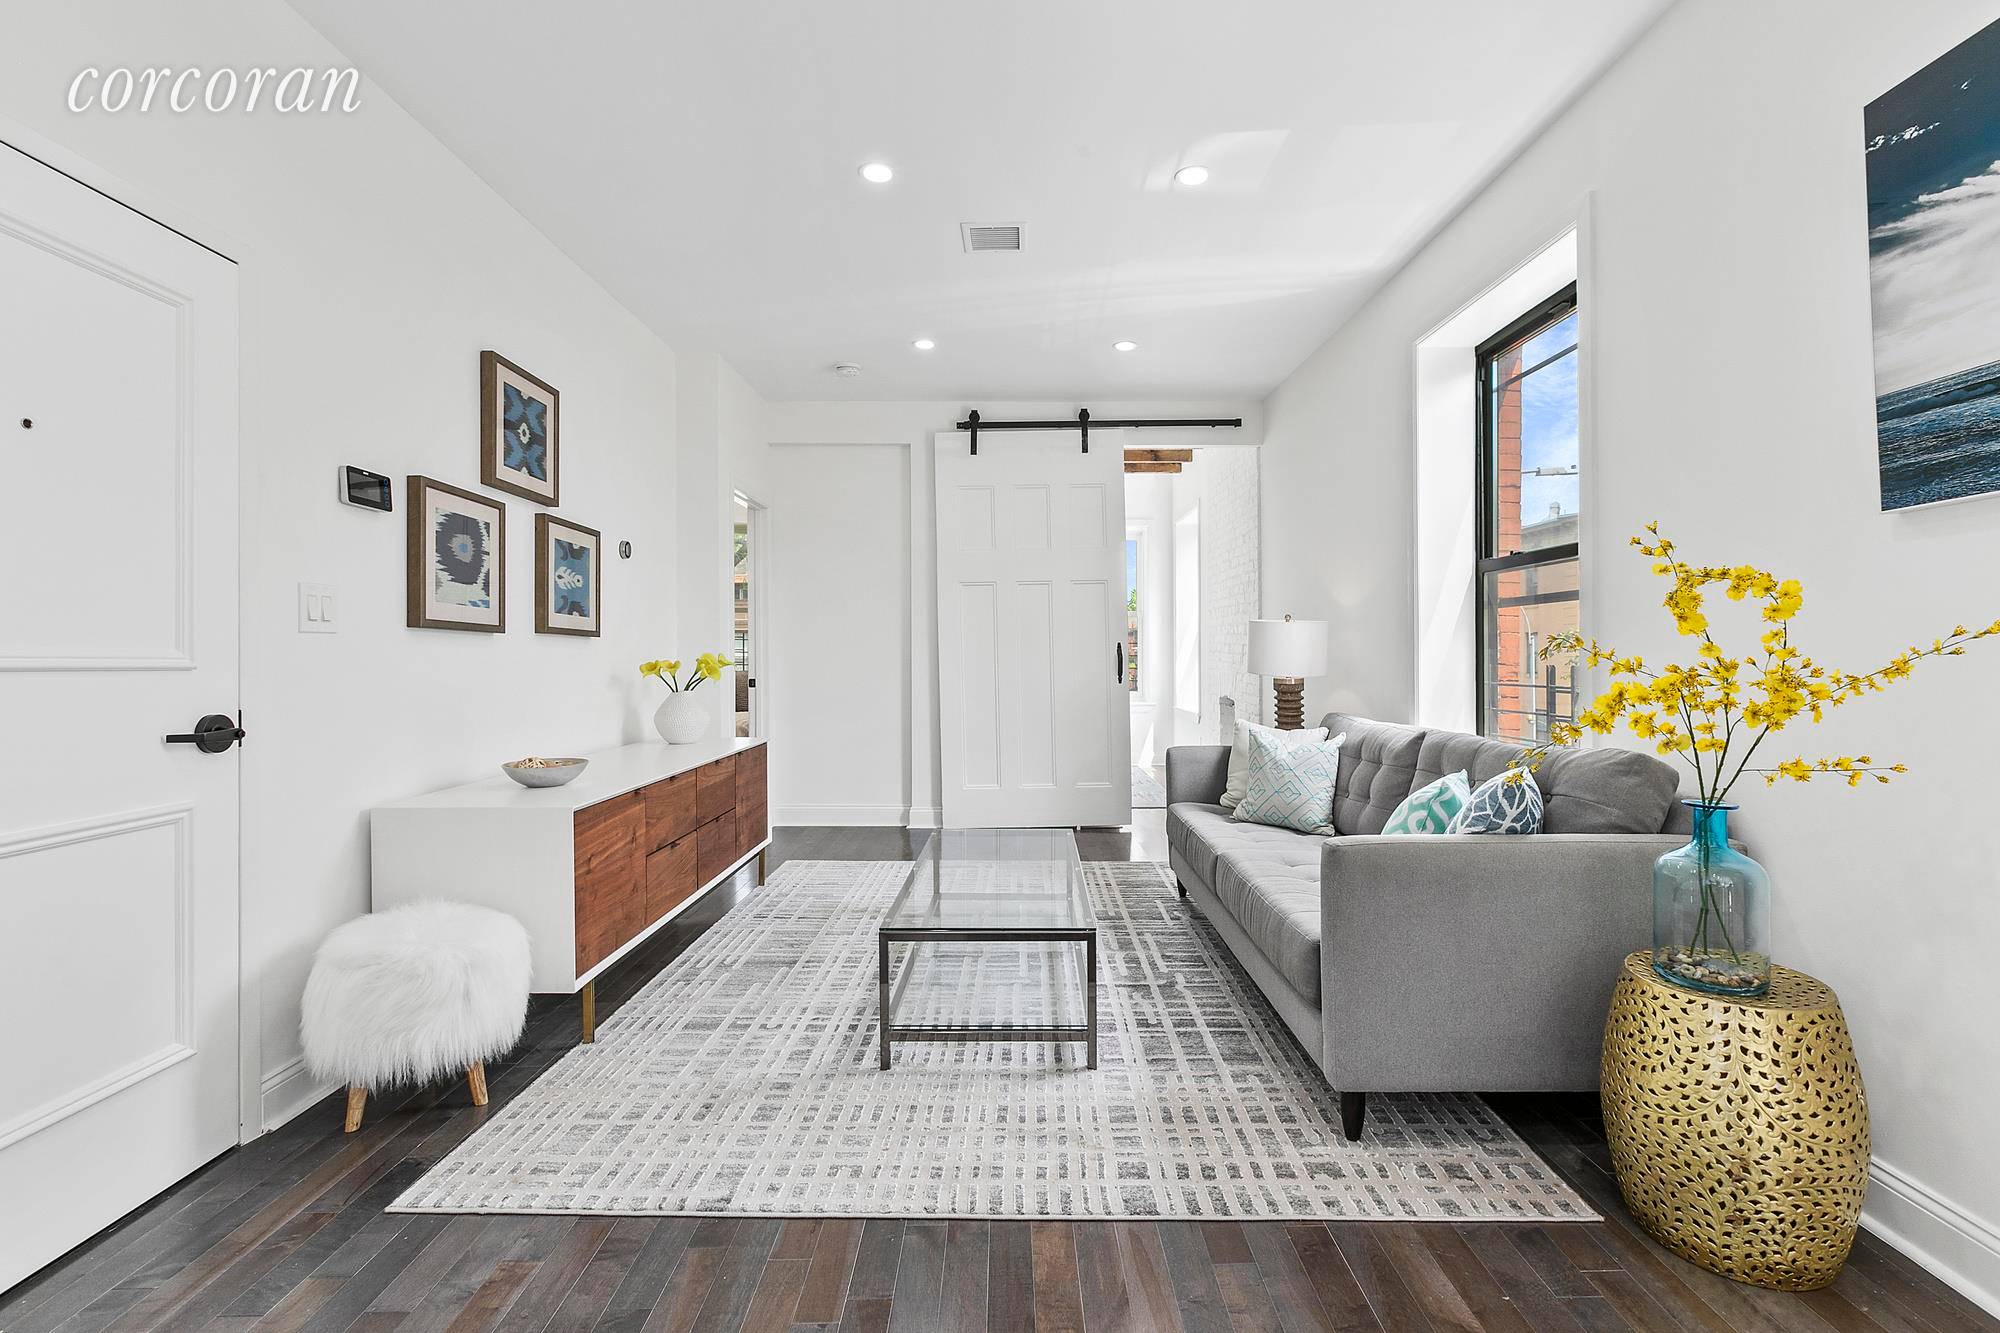 Located on one of Bed Stuy's most beautiful tree lined blocks, this new condo is a showstopper from the moment you enter.